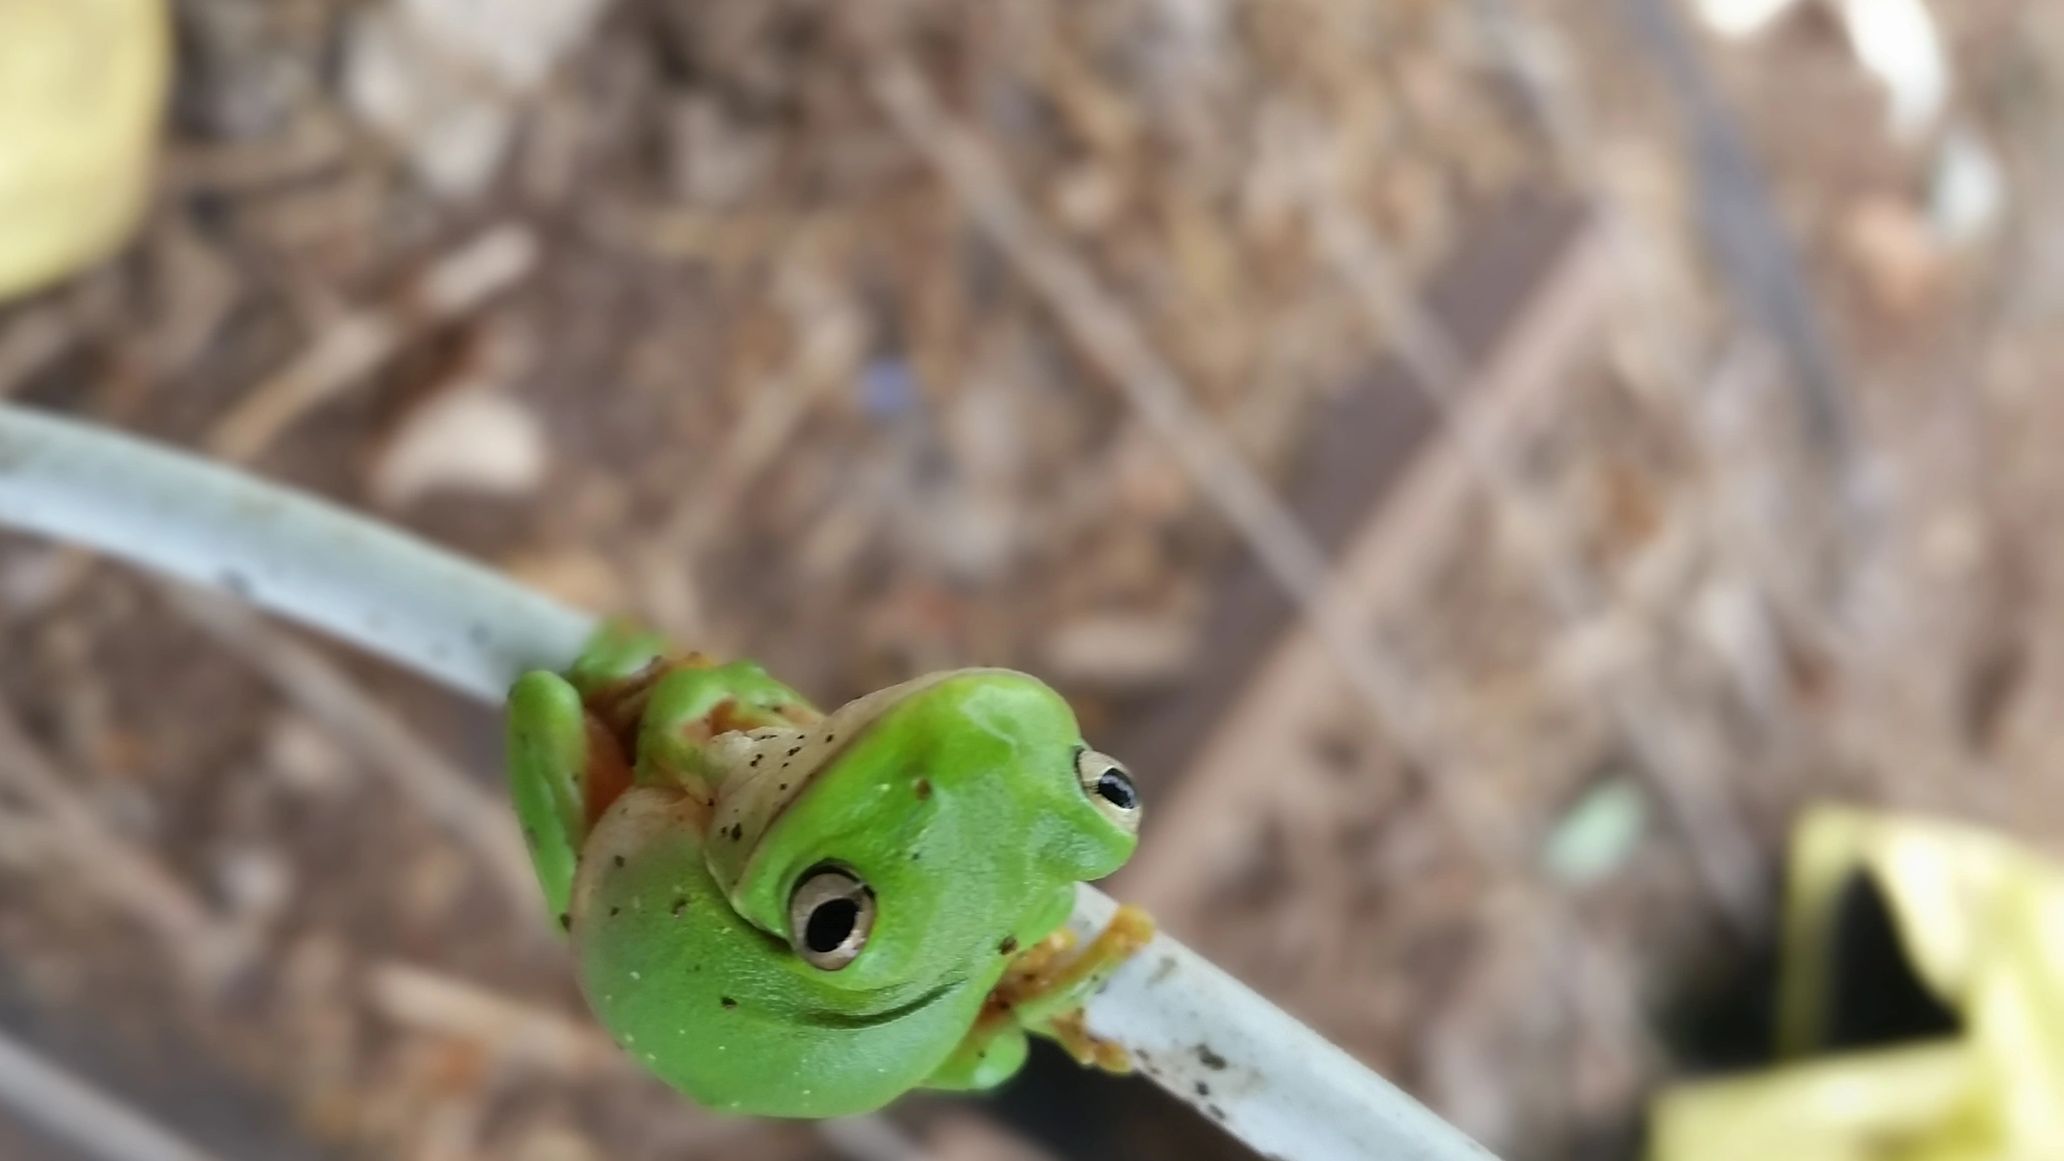 Green tree frog on irrigation pipe at the home of Fruitessence, the Yungaburra Raspberry Farm